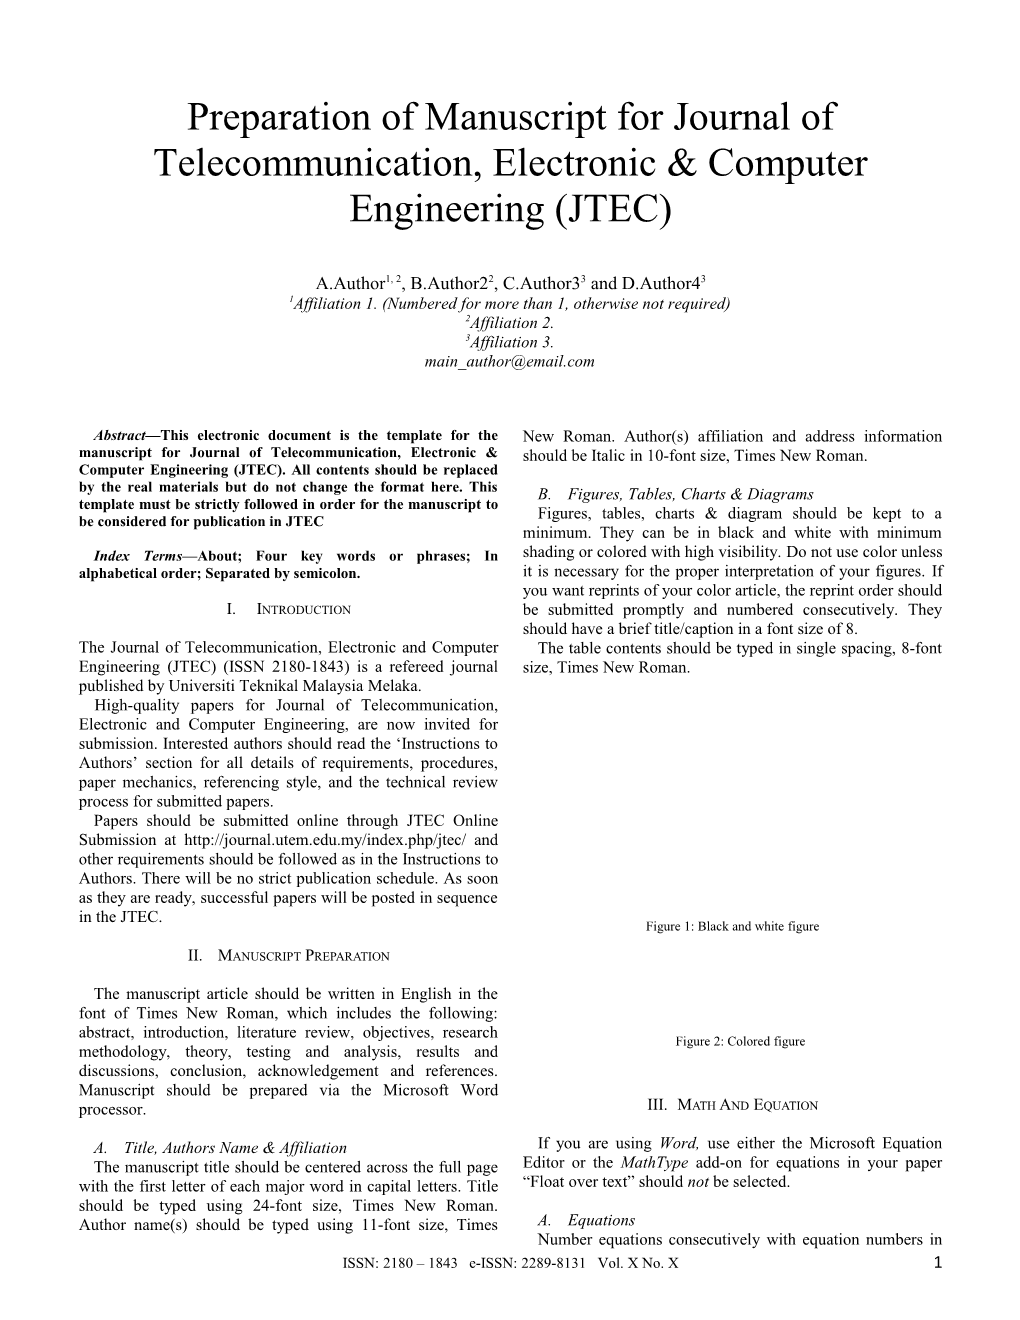 Preparation of Manuscript for Journal of Telecommunication, Electronic & Computer Engineering